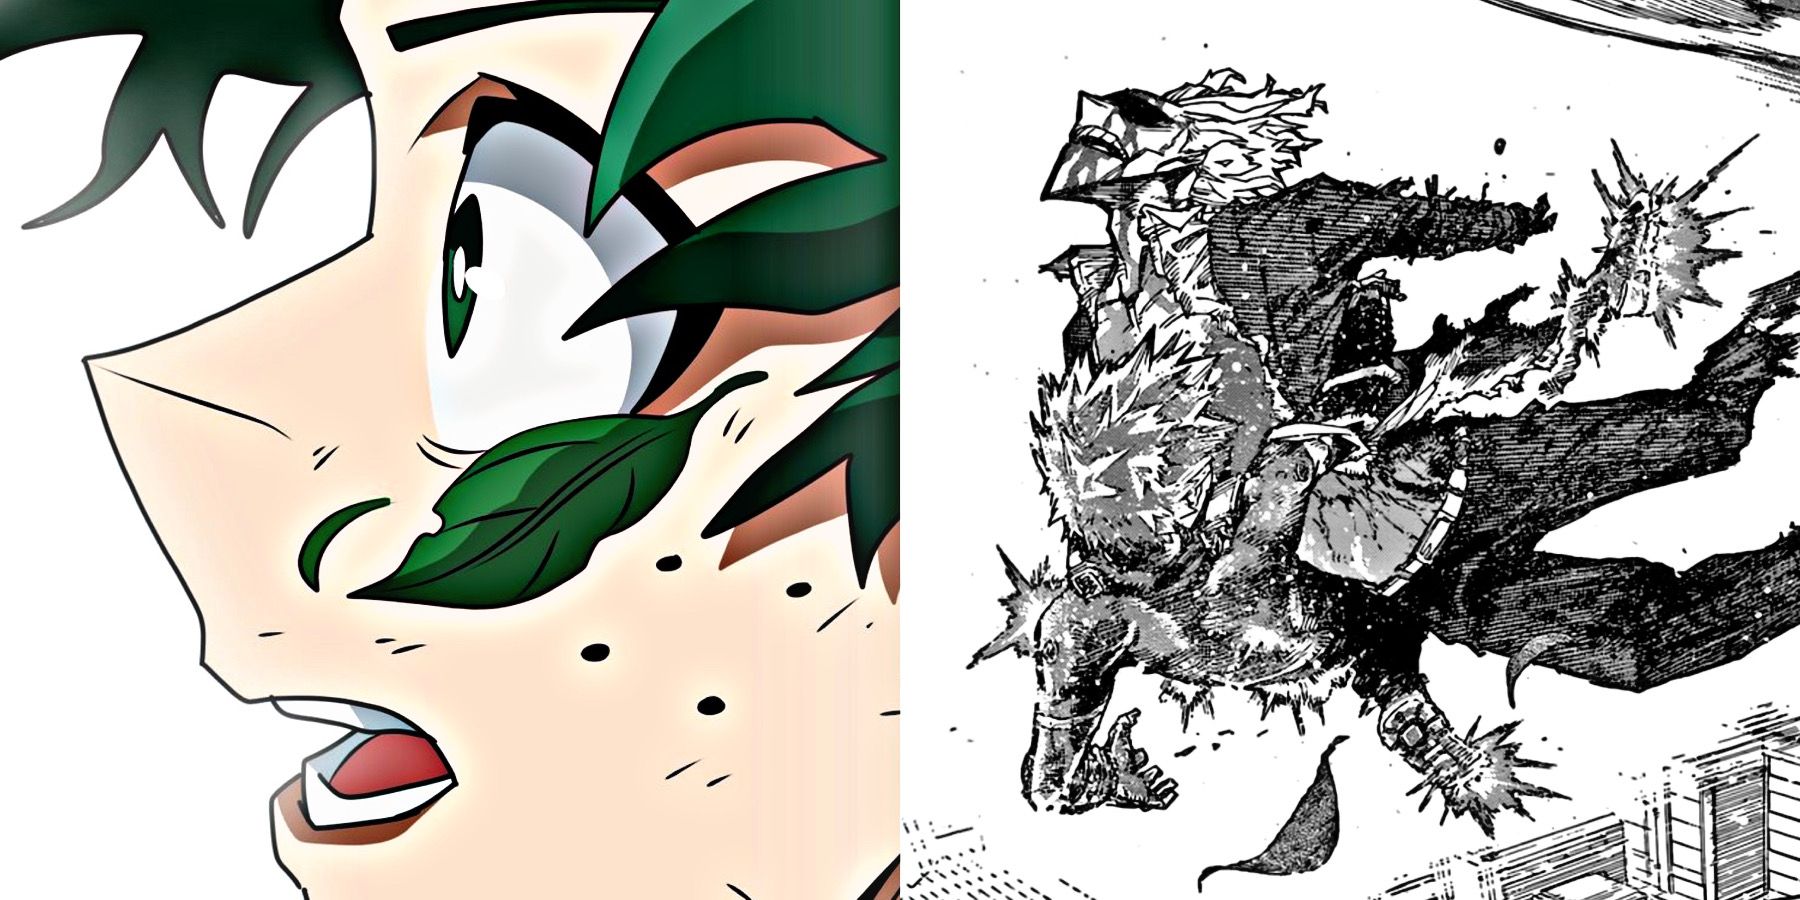 My Hero Academia Chapter 405 Preview: Bakugo Vs All For One Begins